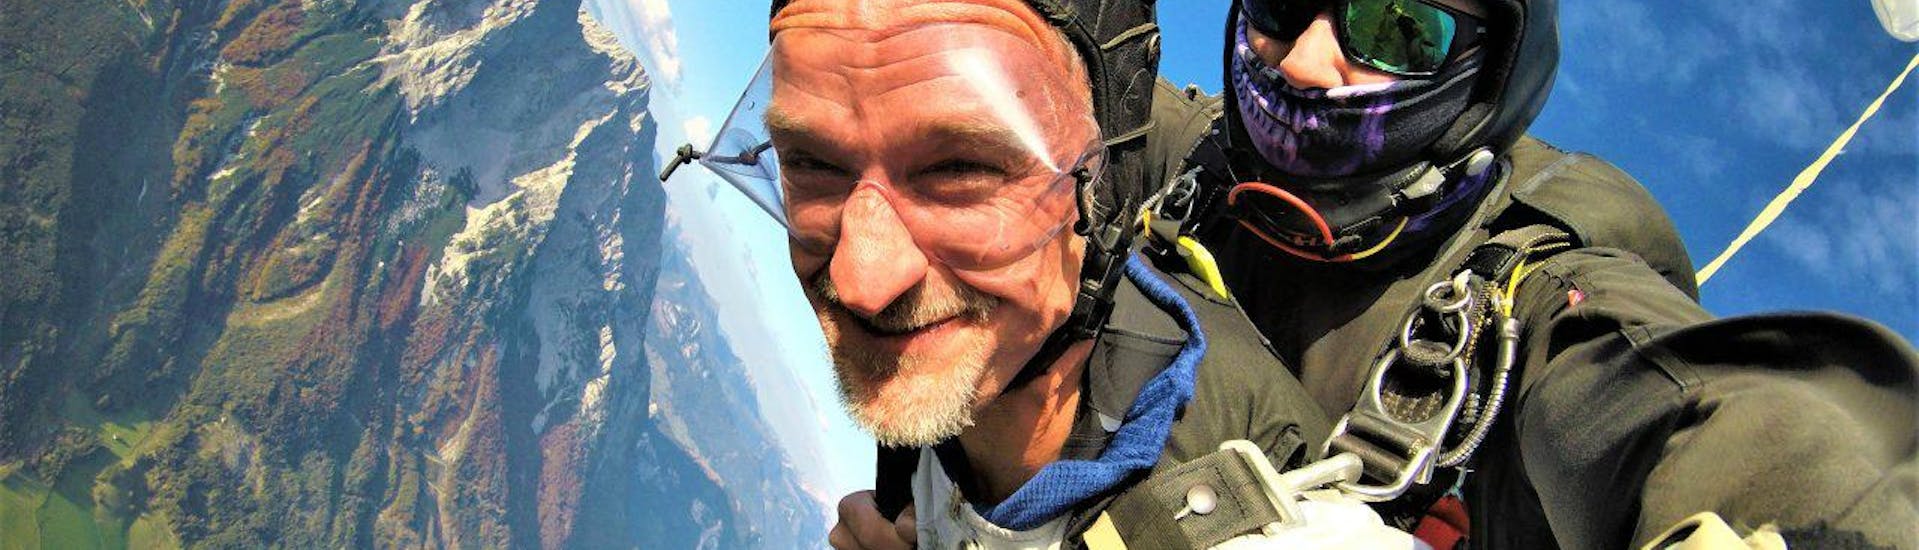 Tandem Skydive from 4000m - Lienz.